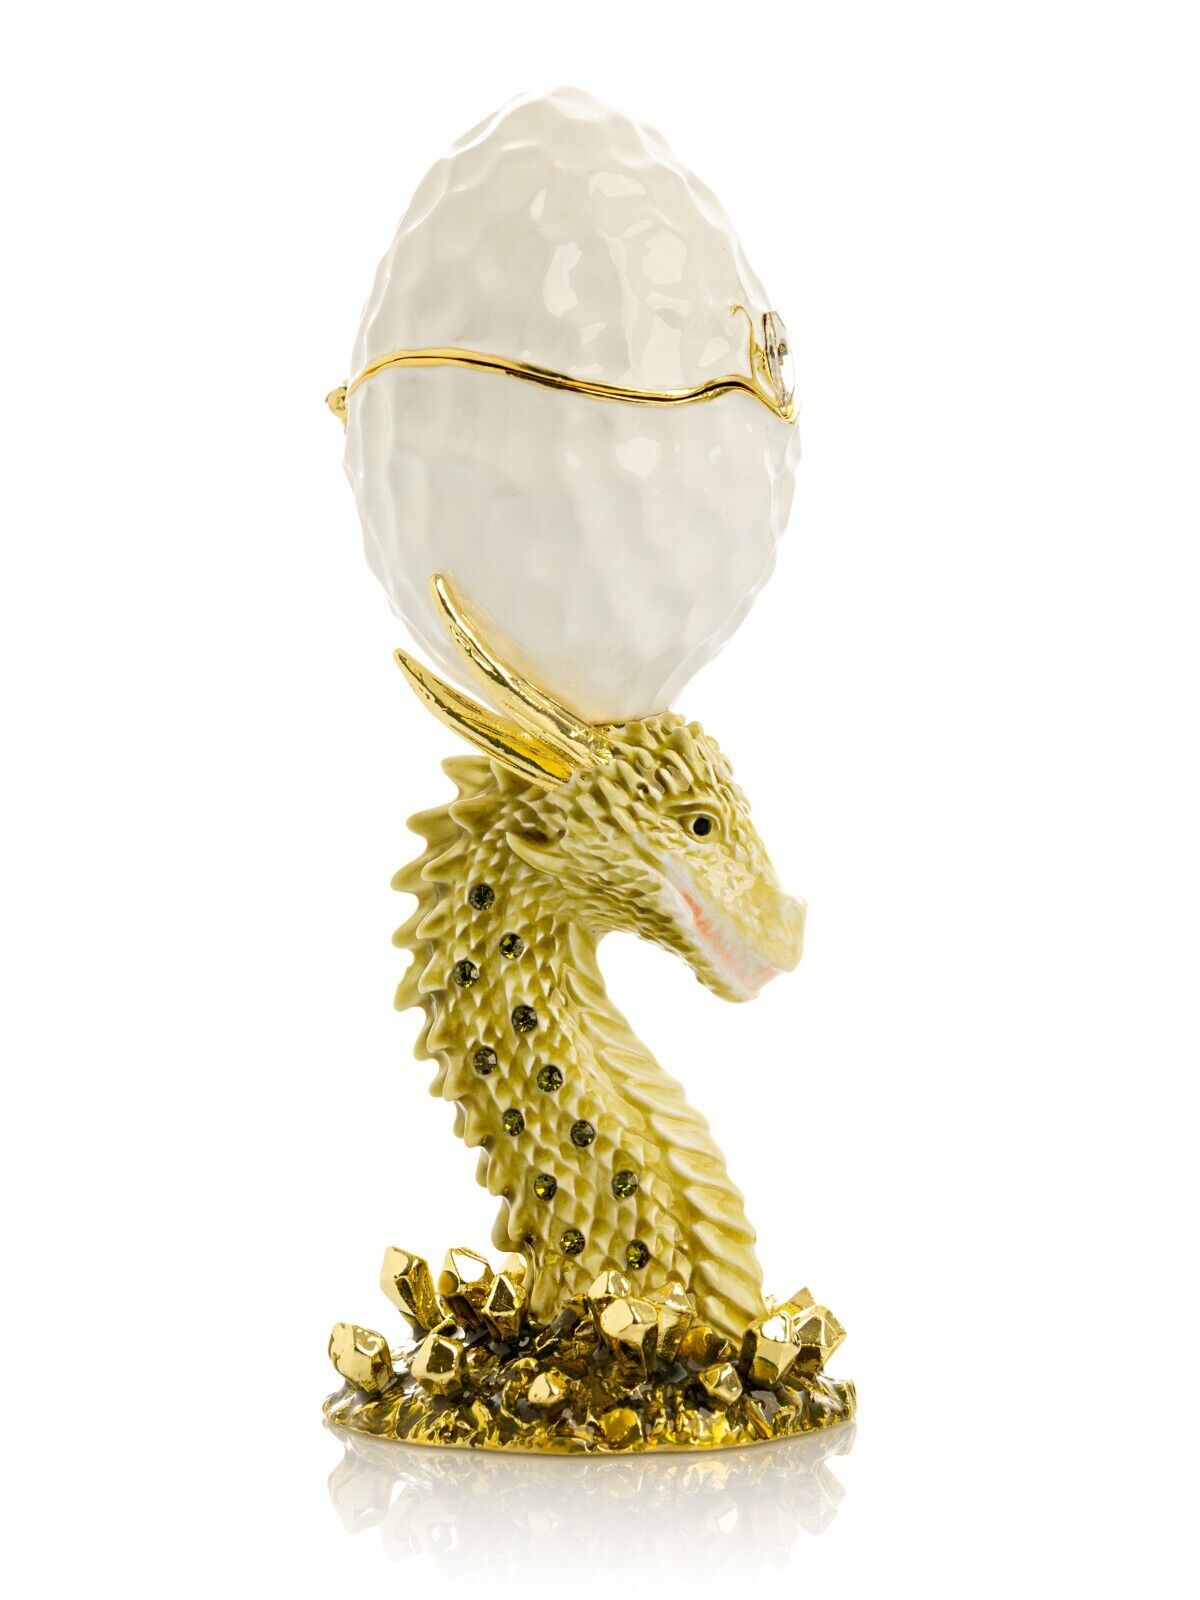 Keren Kopal Egg  with Dragon Trinket box  Decorated with Austrian Crystals